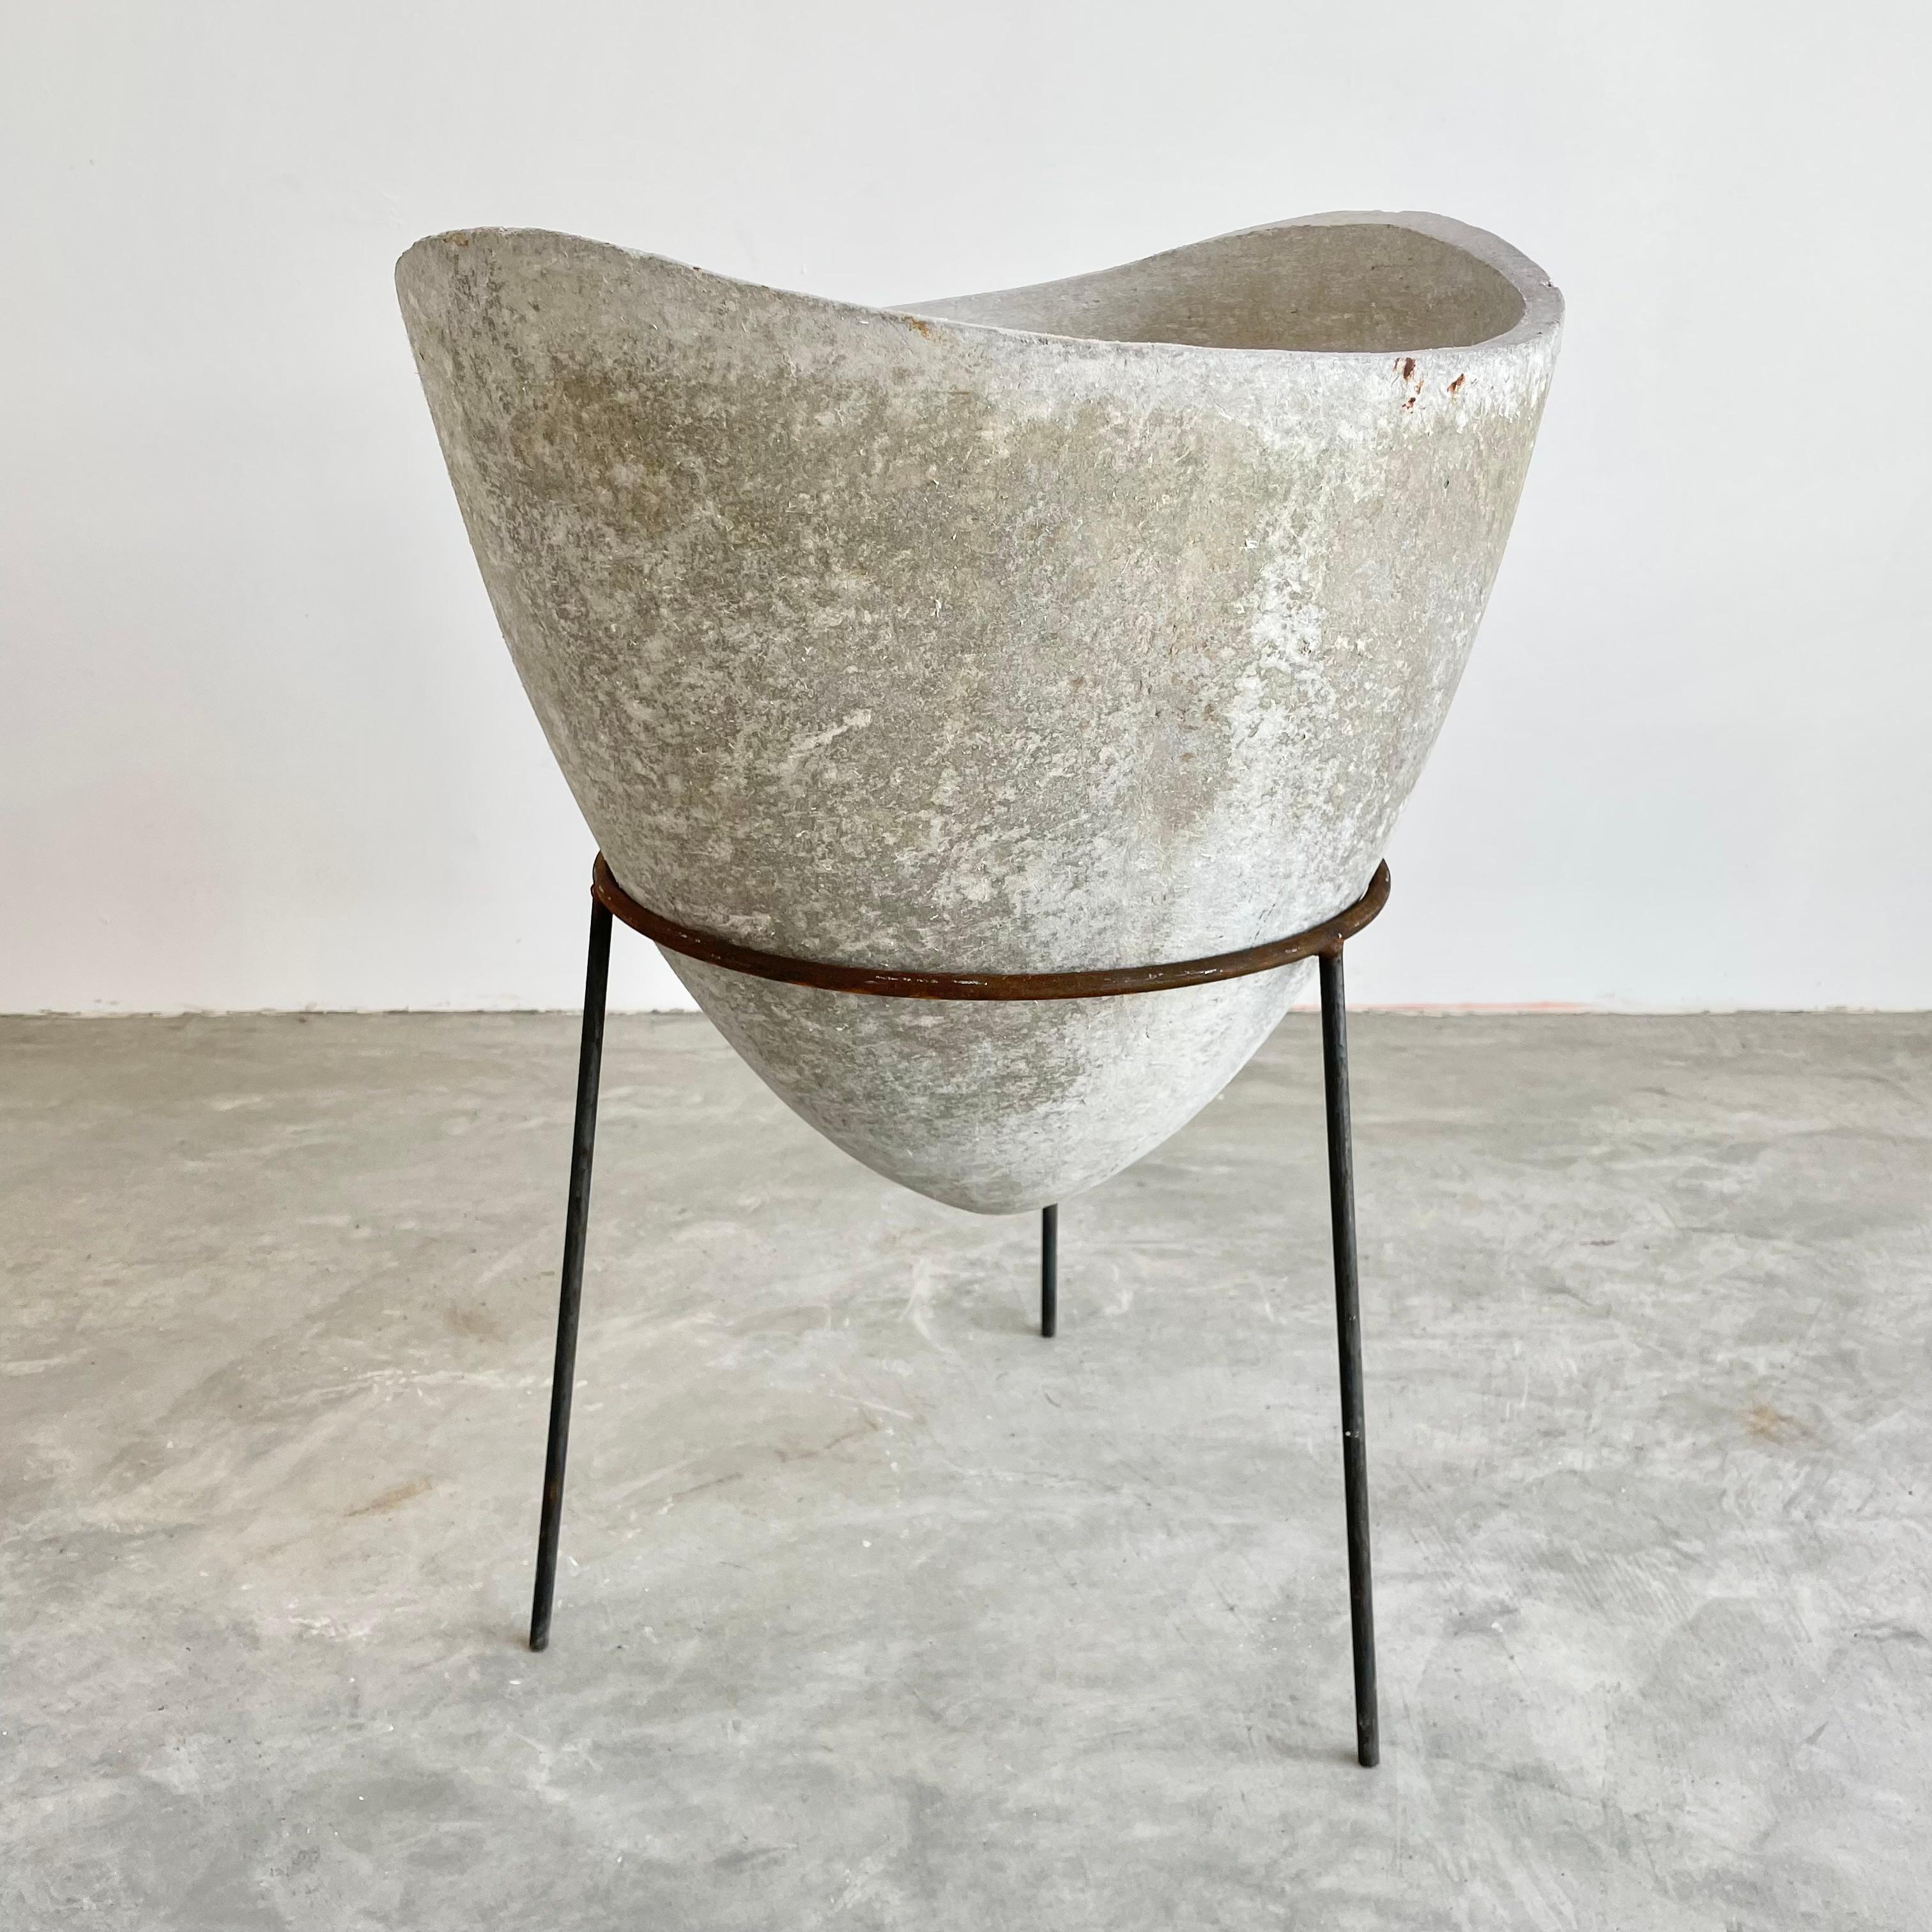 Rare and unusual biomorphic bowl planter by Willy Guhl made in the 1960s  Switzerland. Thick concrete frame with undulating top edge. This inverted bowl sits comfortably in a tall iron tripod stand. Clean patina to planter and great color to iron.